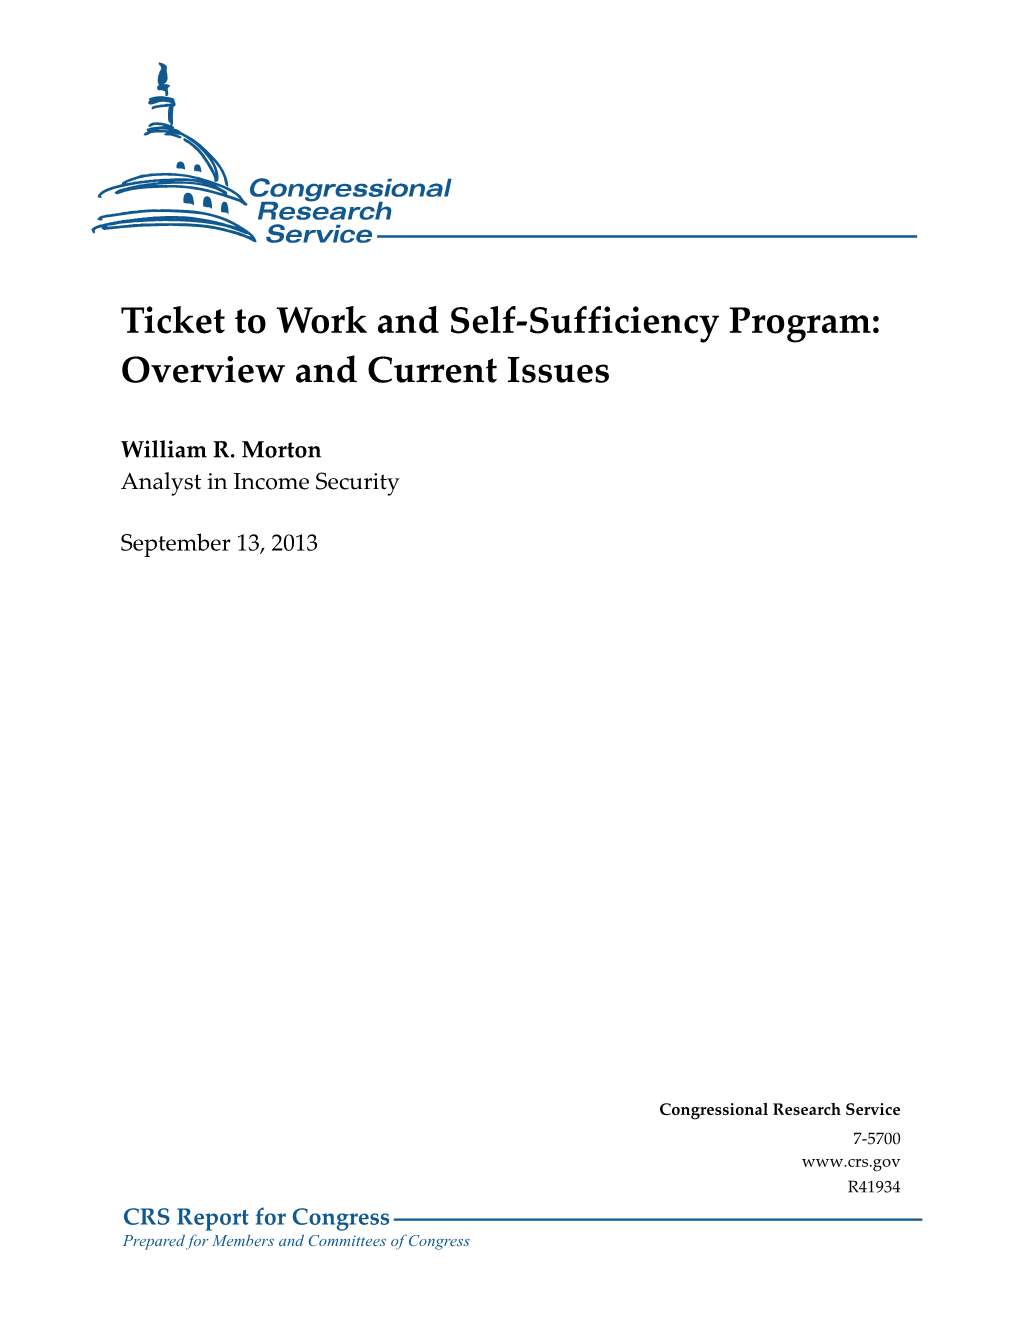 Ticket to Work and Self-Sufficiency Program: Overview and Current Issues